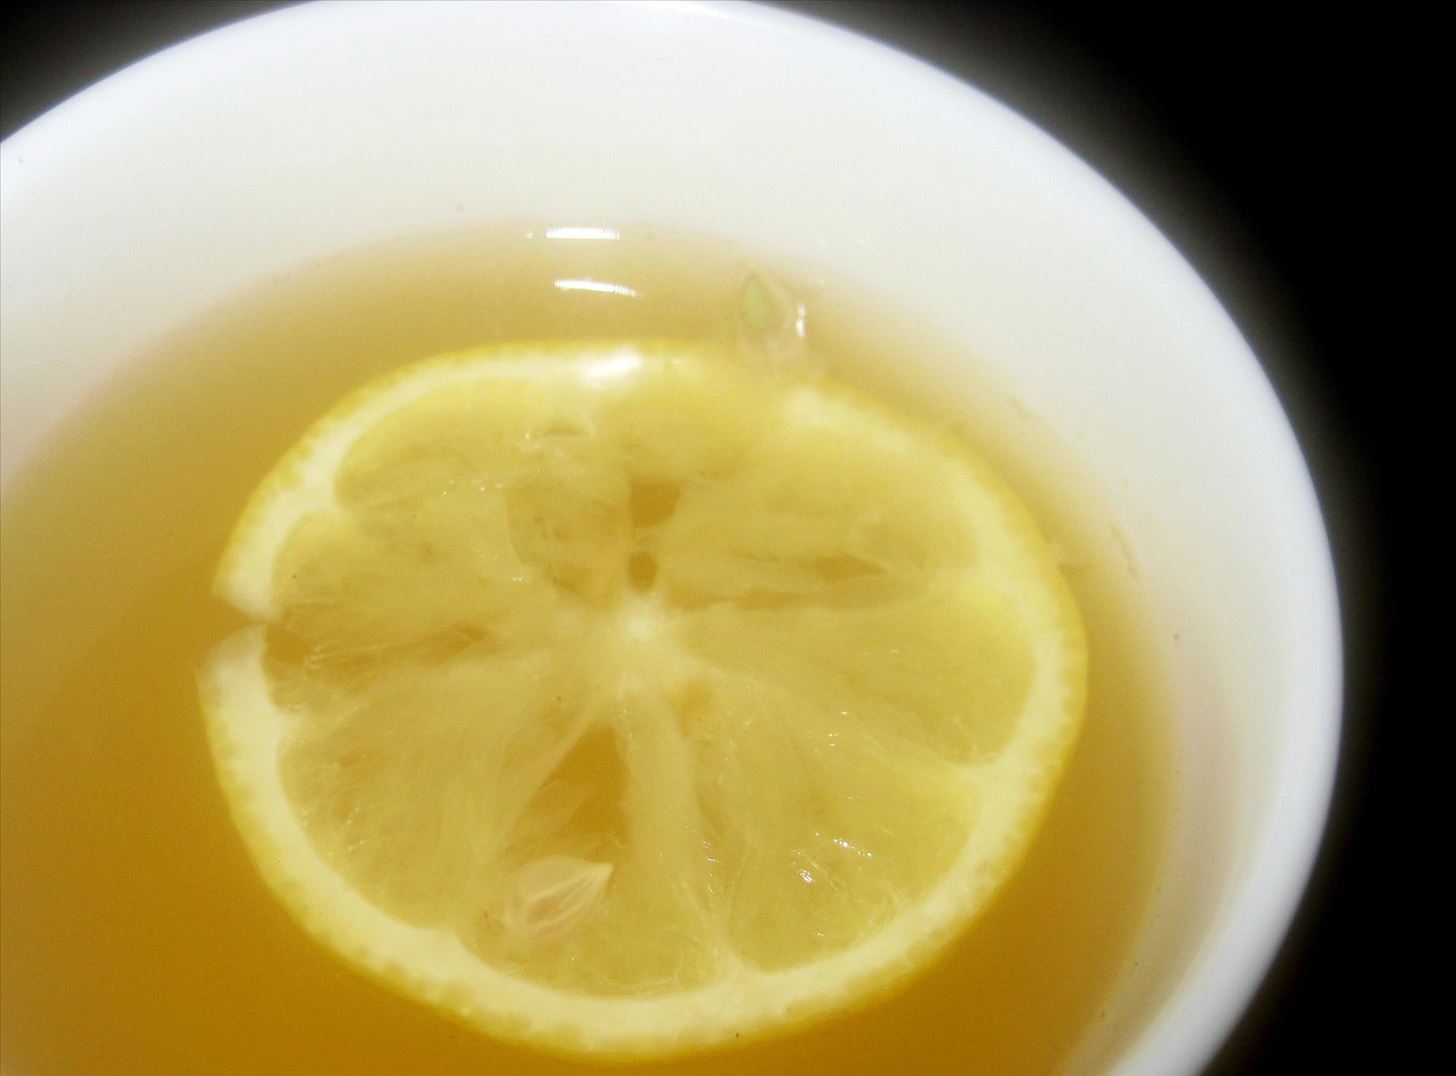 Lemon Aid: Use Lemons to Clean Copper, Keep Pasta from Sticking, & More